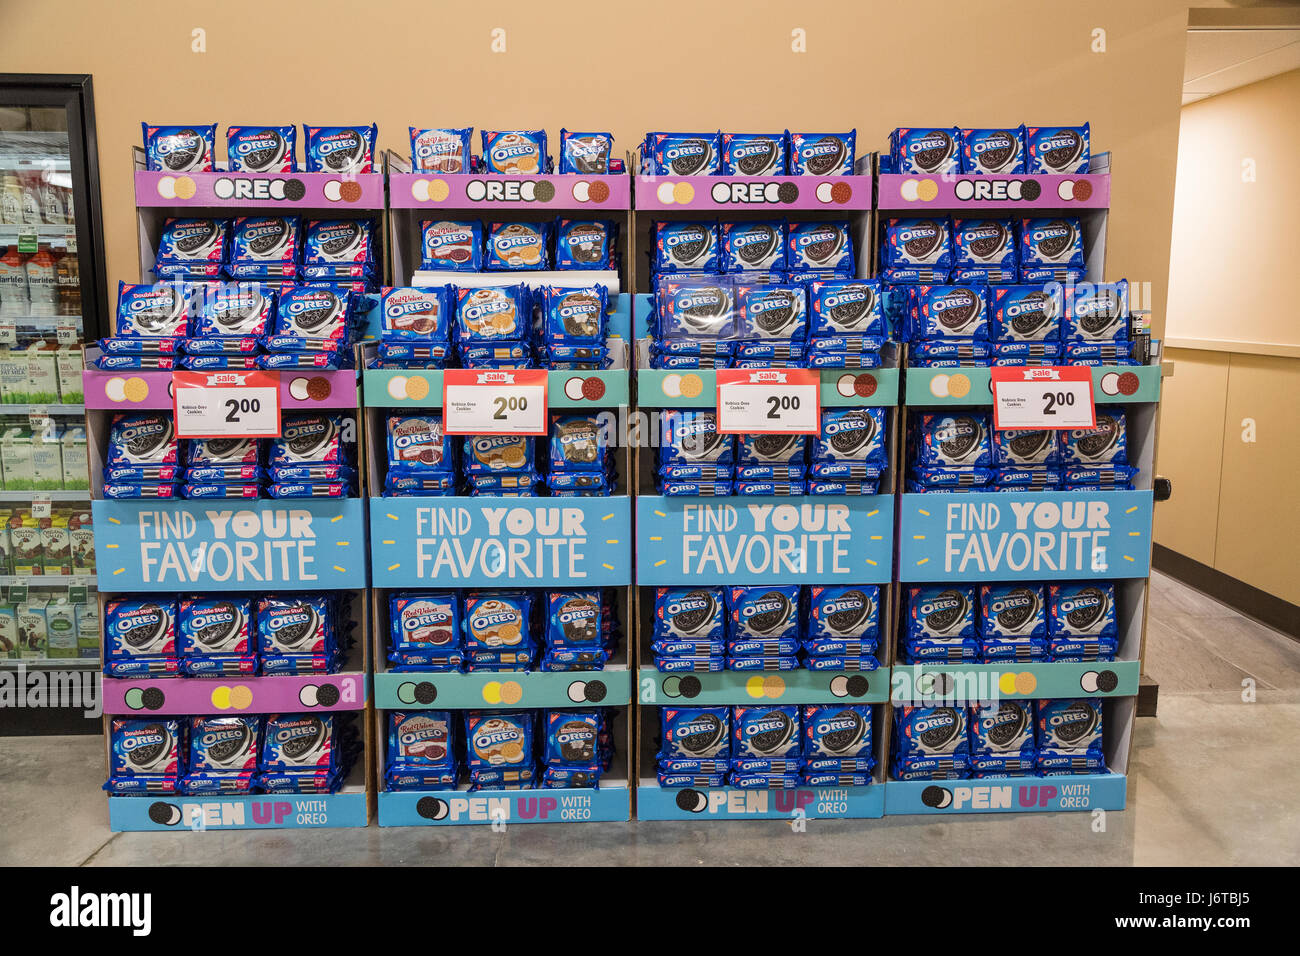 A large display of Oreo cookies in a grocery store Stock Photo